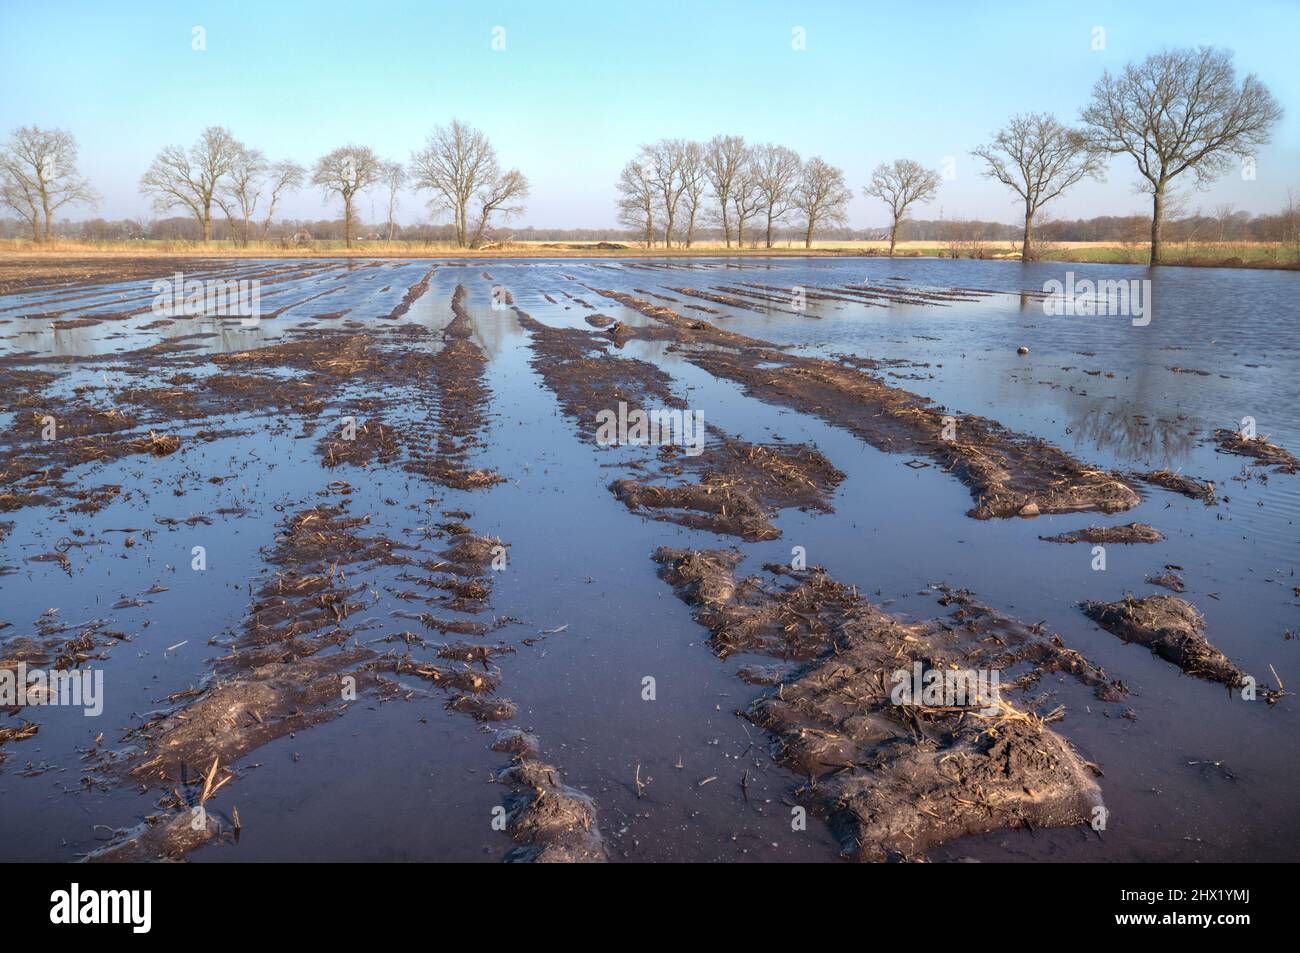 Muddy field after bad weather, flooded after heavy rains in winter Stock Photo